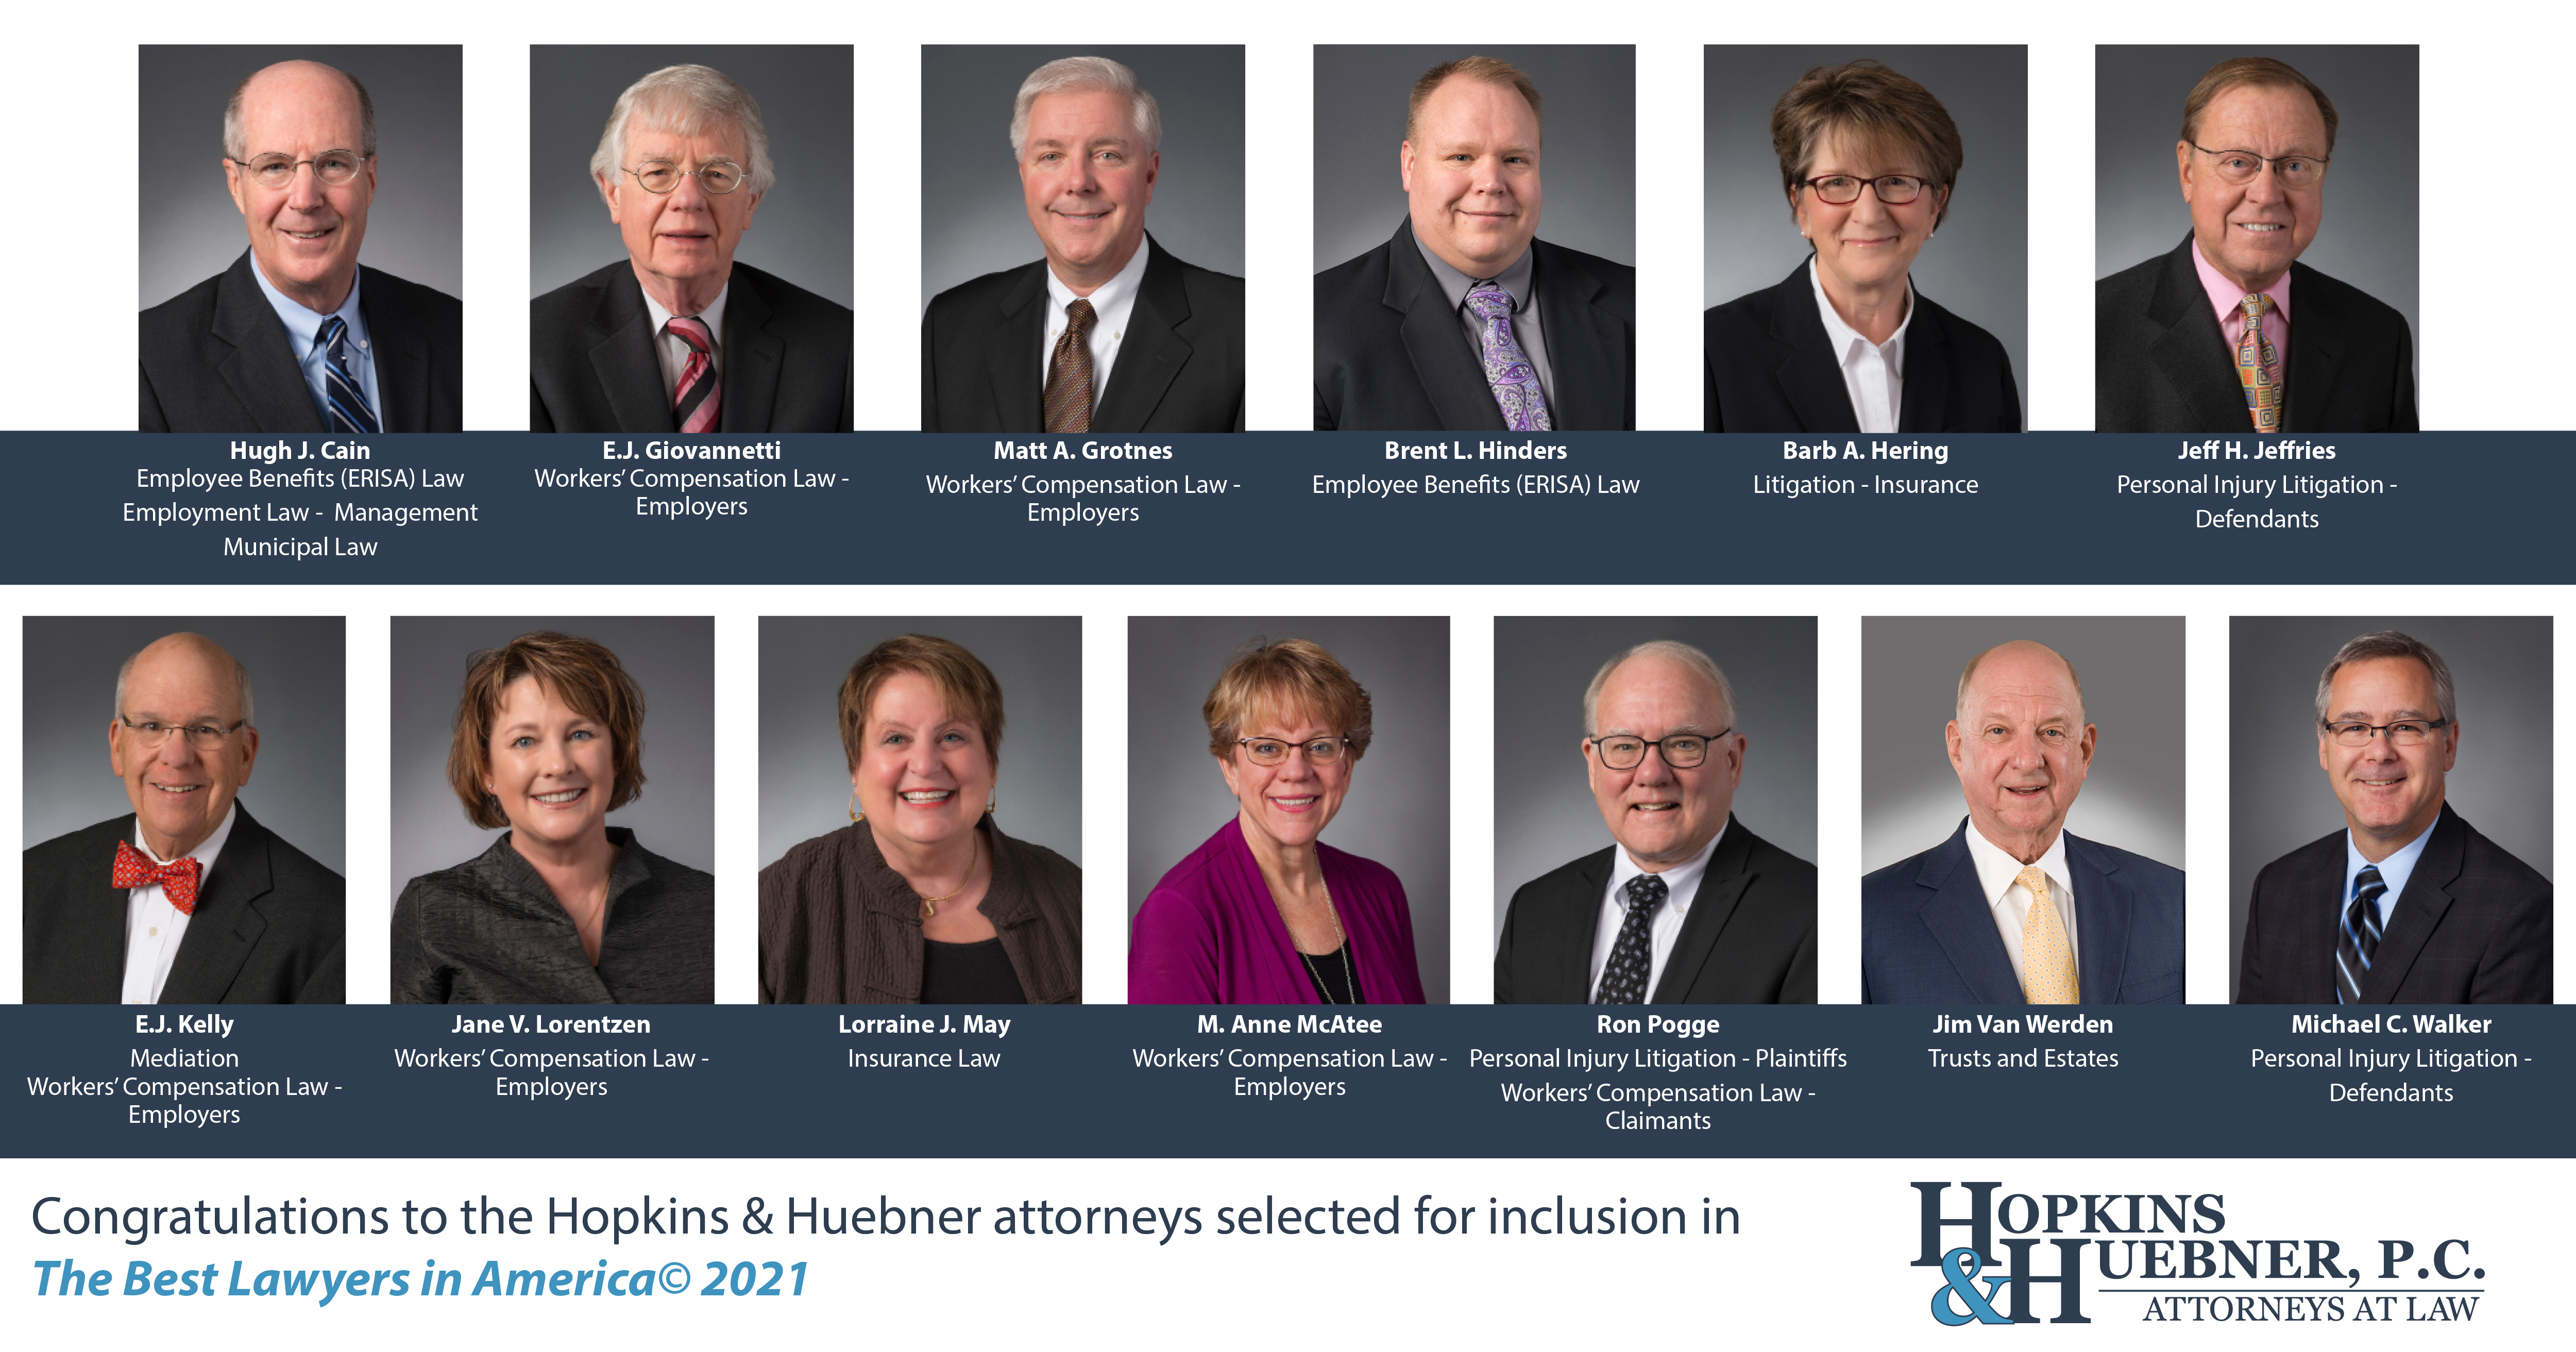 Thirteen Hopkins & Huebner attorneys were selected for inclusion in The Best Lawyers in America 2021